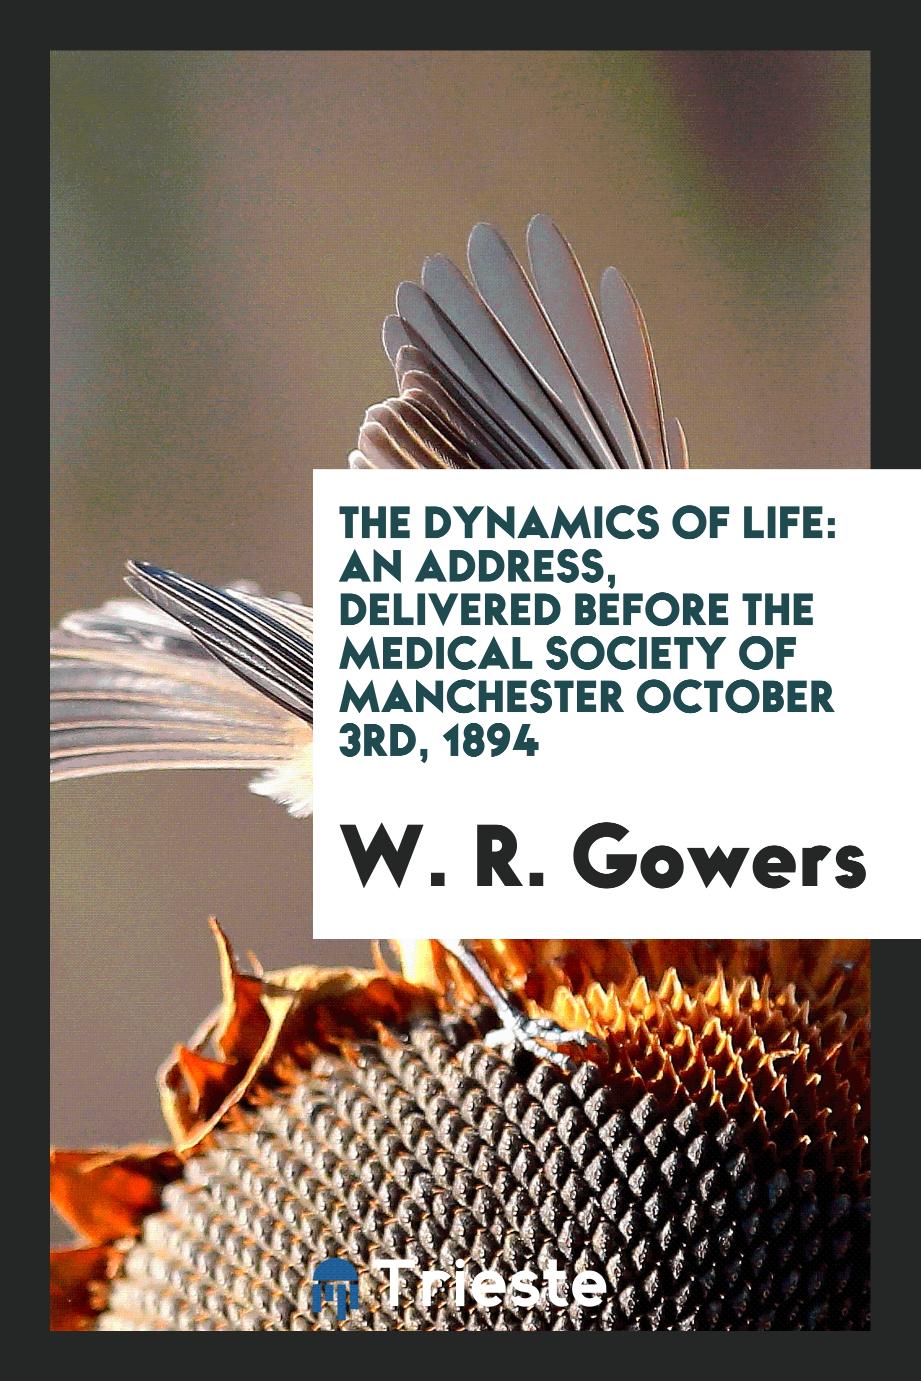 The Dynamics of life: An Address, Delivered Before the Medical Society of Manchester October 3rd, 1894